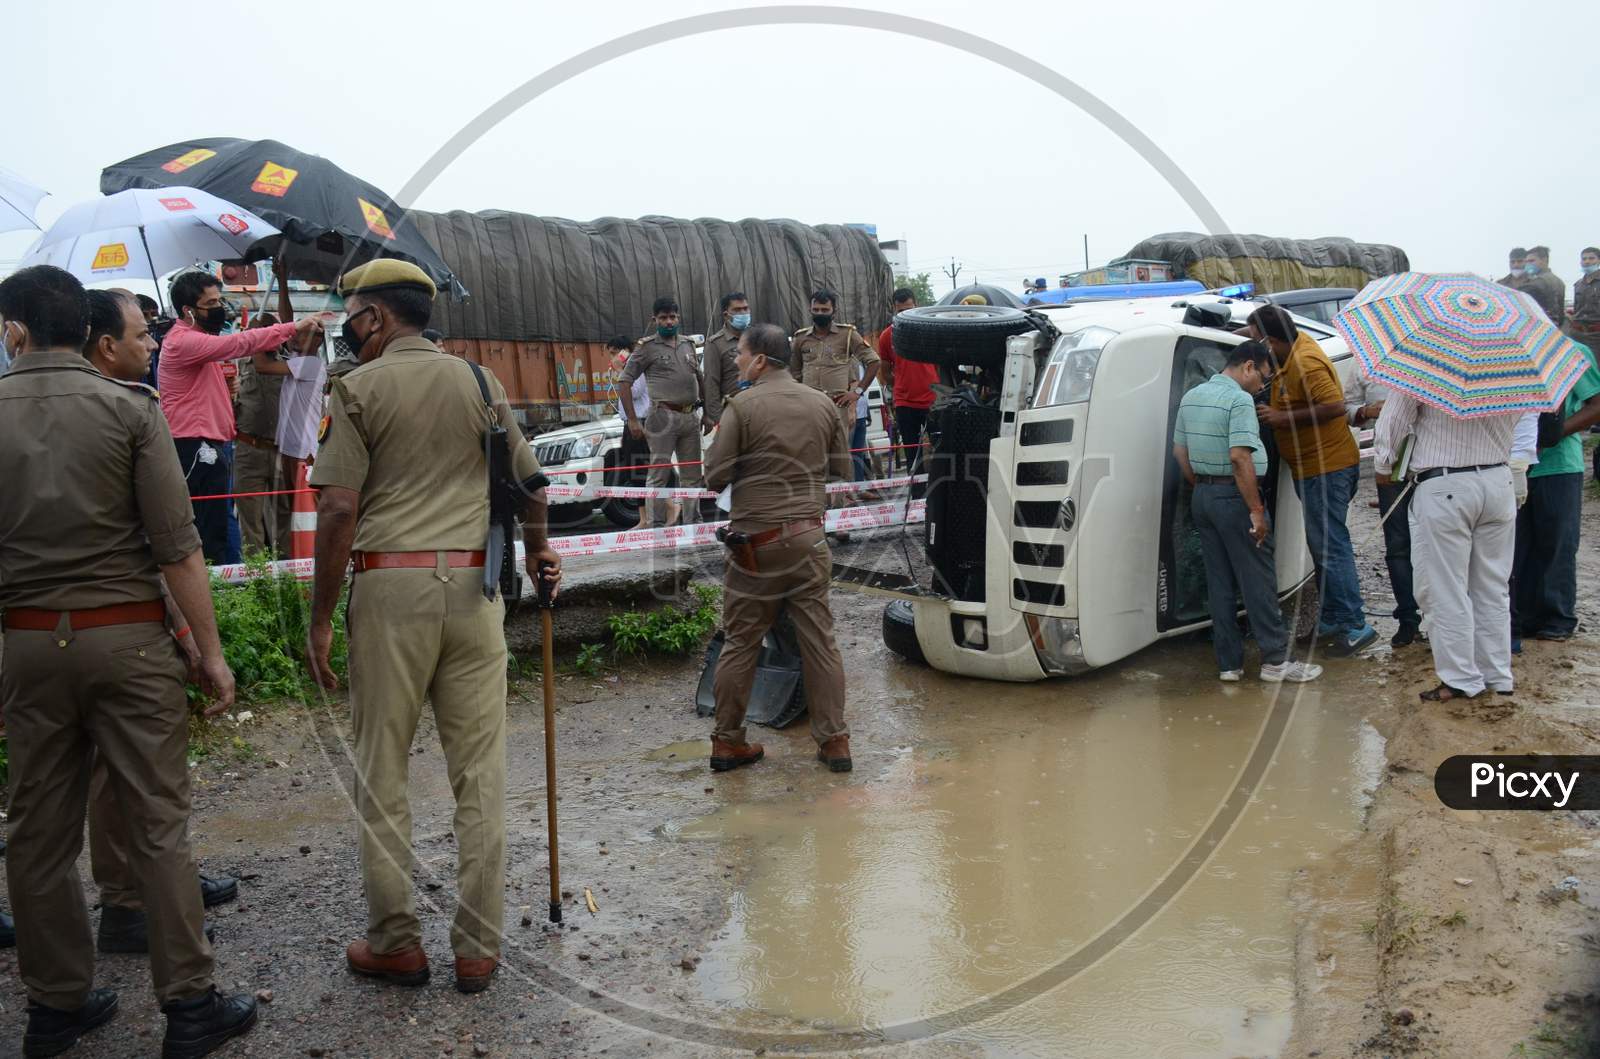 Police officials inspect the site of encounter where gangster Vikas Dubey was killed when he tried to escape from police custody in Kanpur, Uttar Pradesh on July 10, 2020